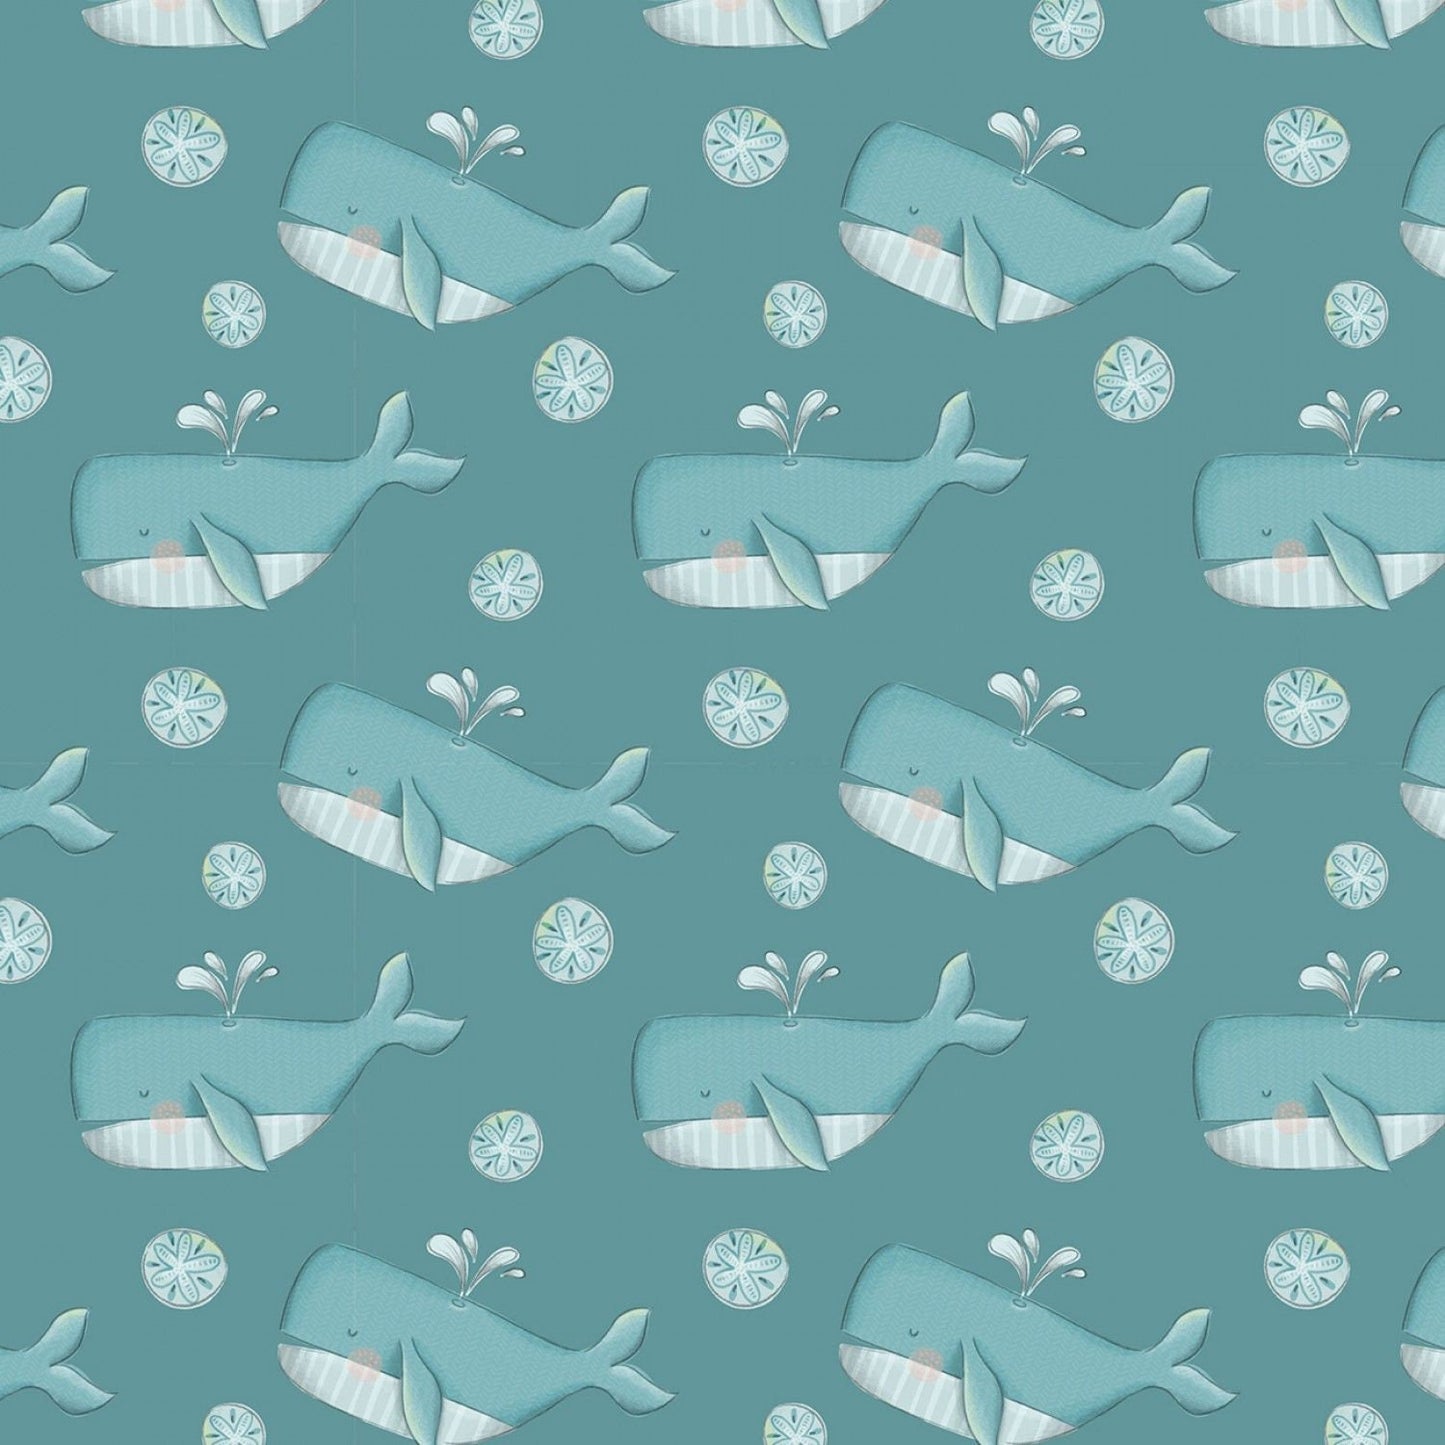 Under The Sea Whales 2682C-02 Cotton Woven Fabric